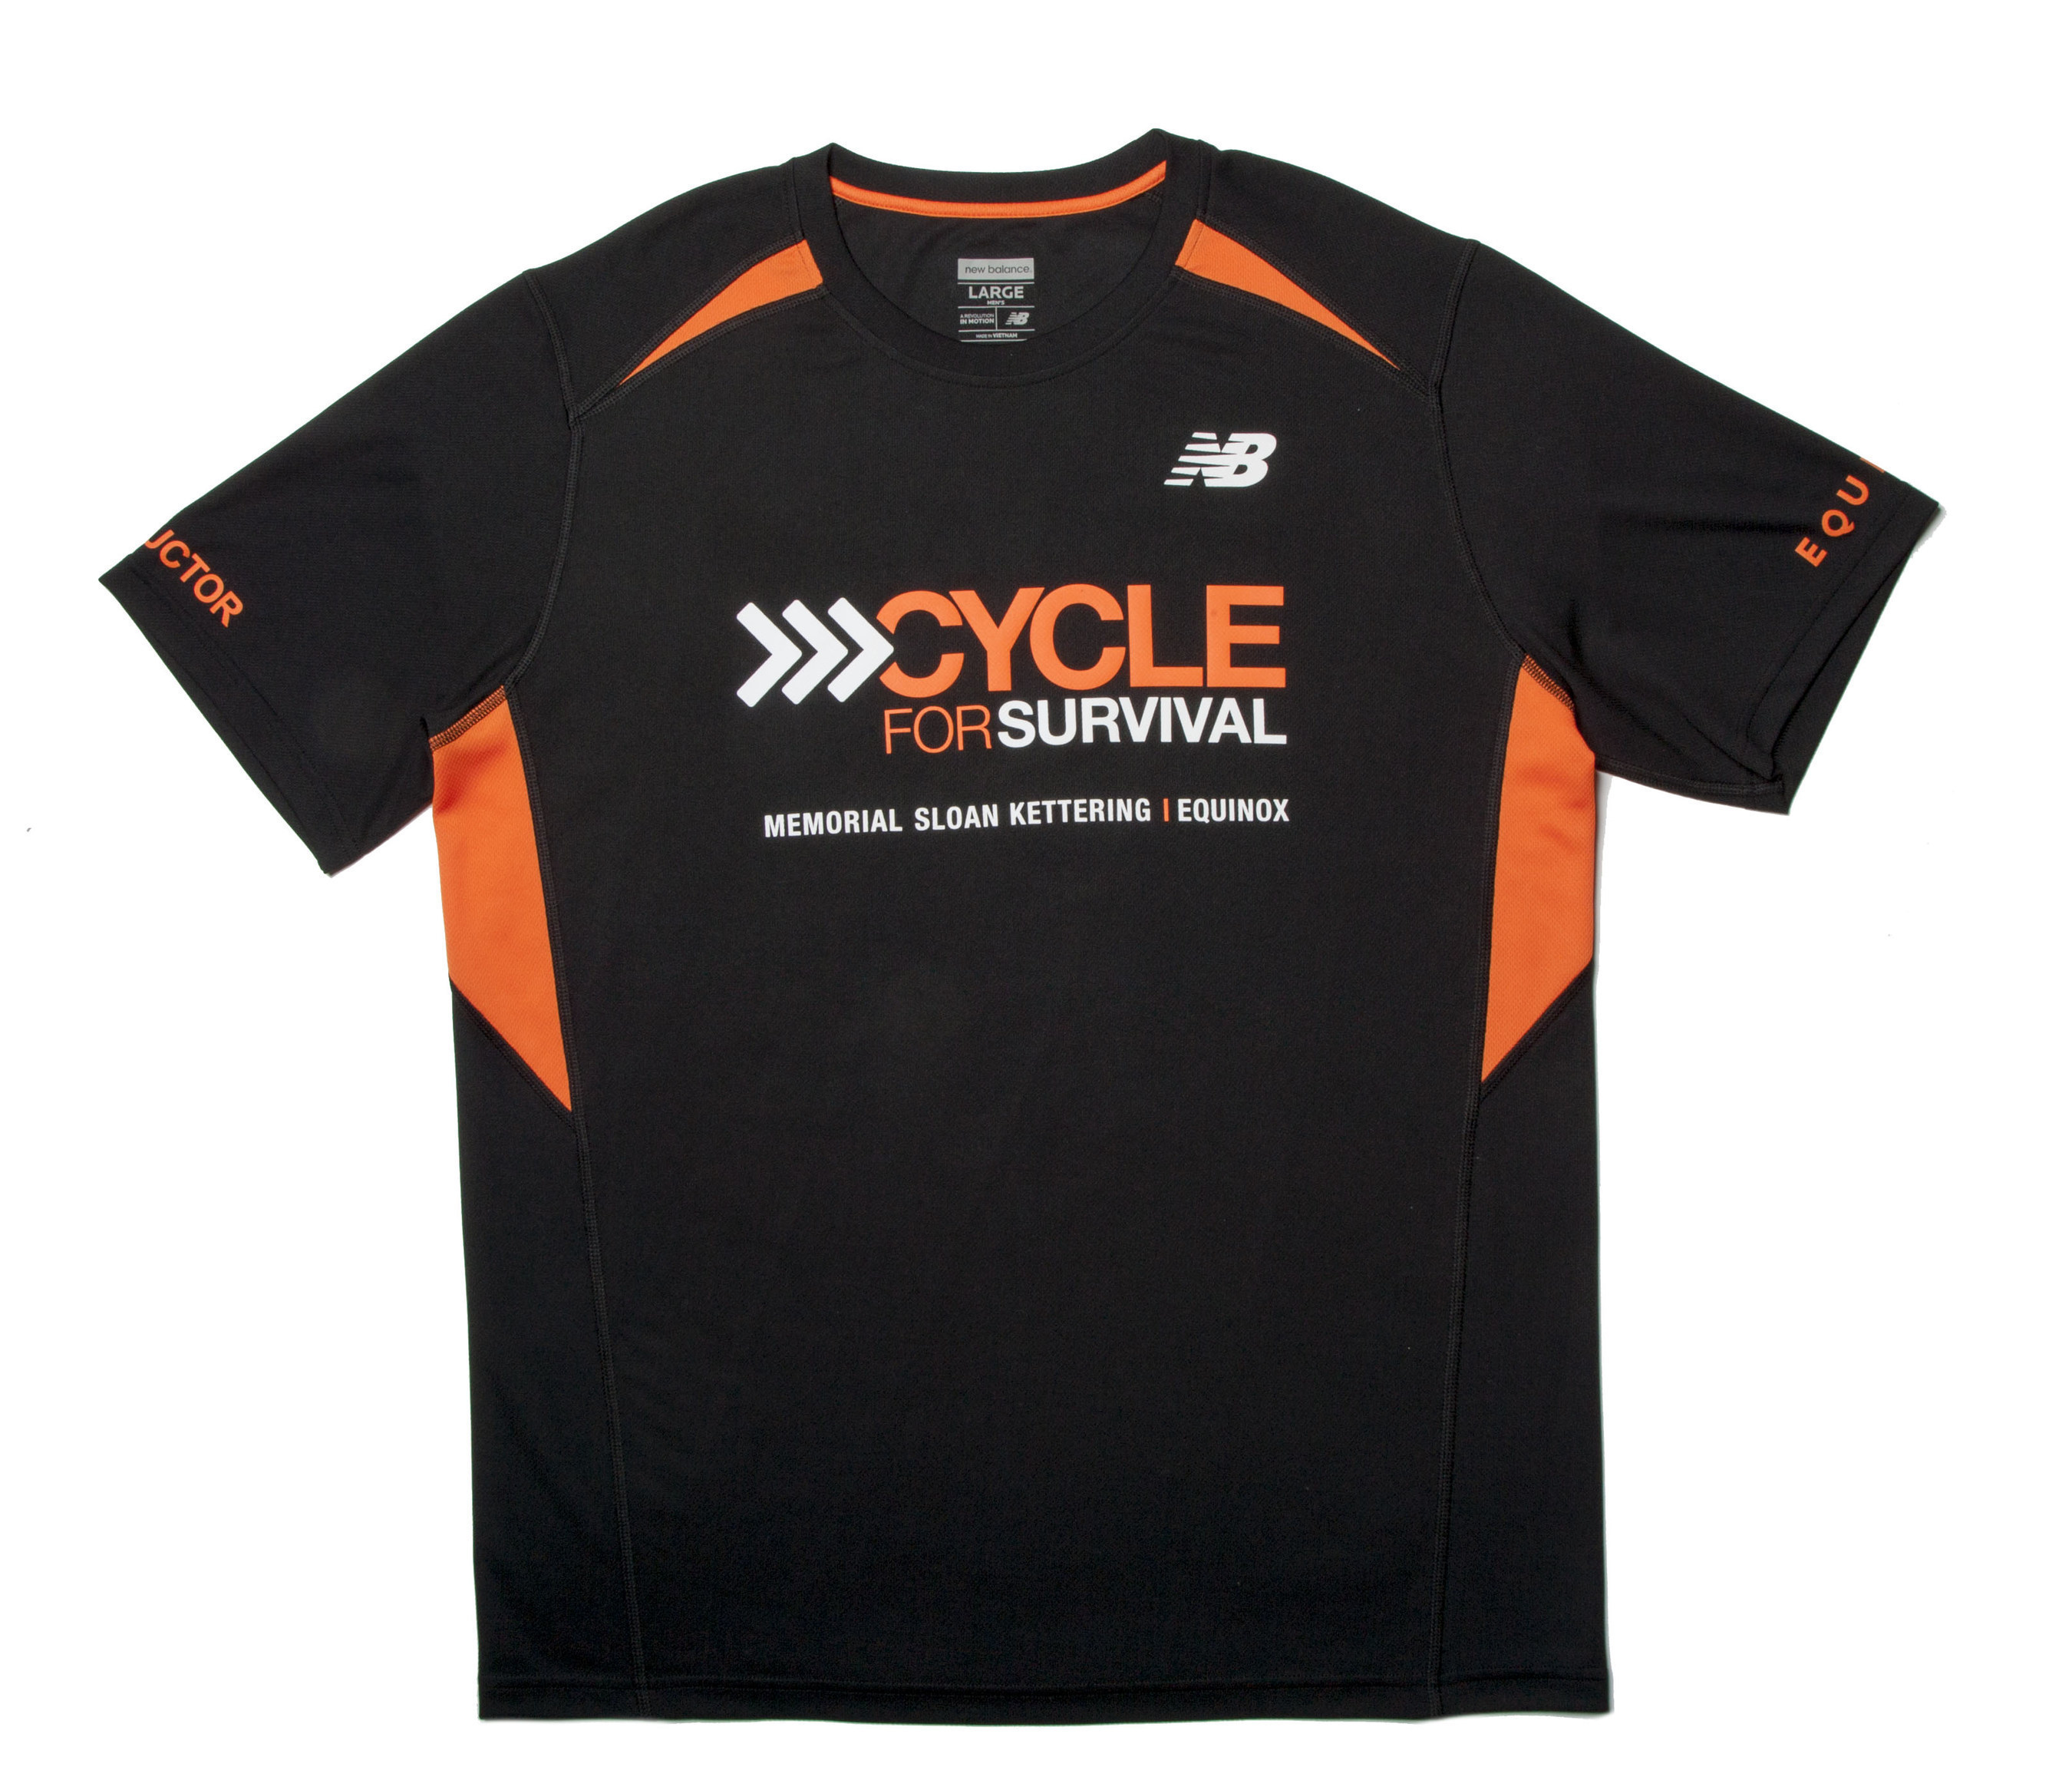 New Balance Instructor Tee for Cycle for Survival's 2015 events